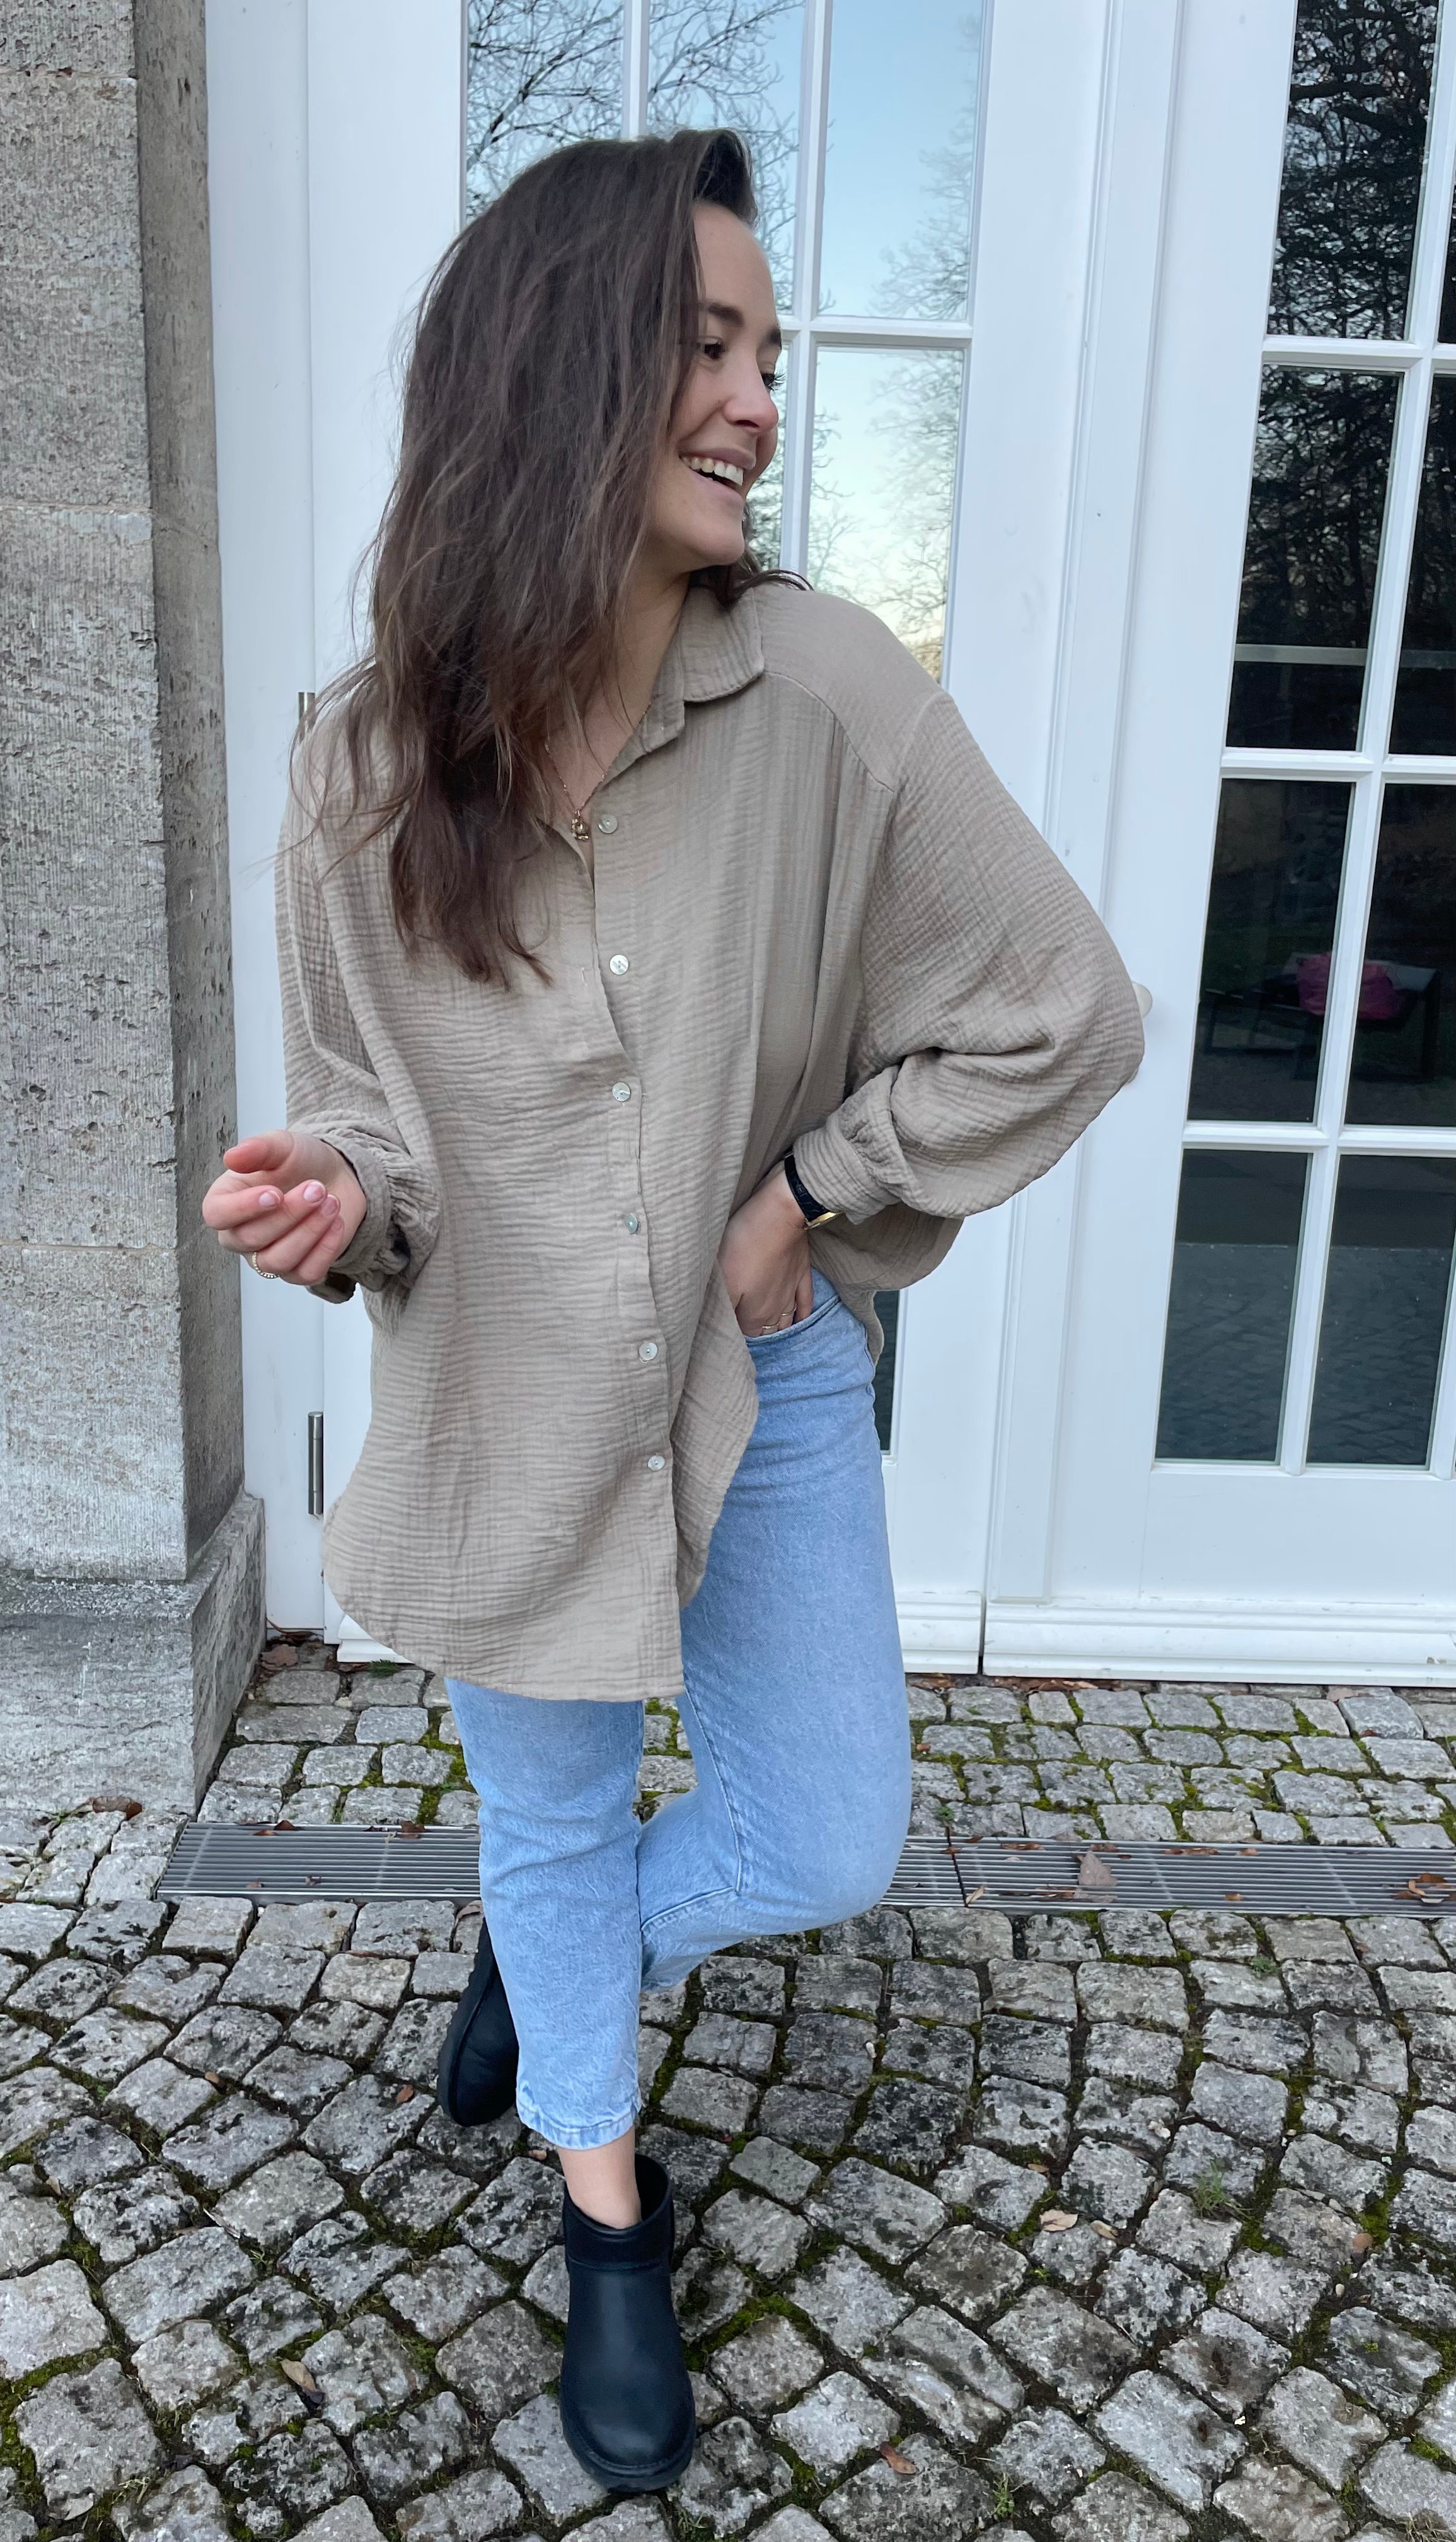 Musselin Bluse Taupe